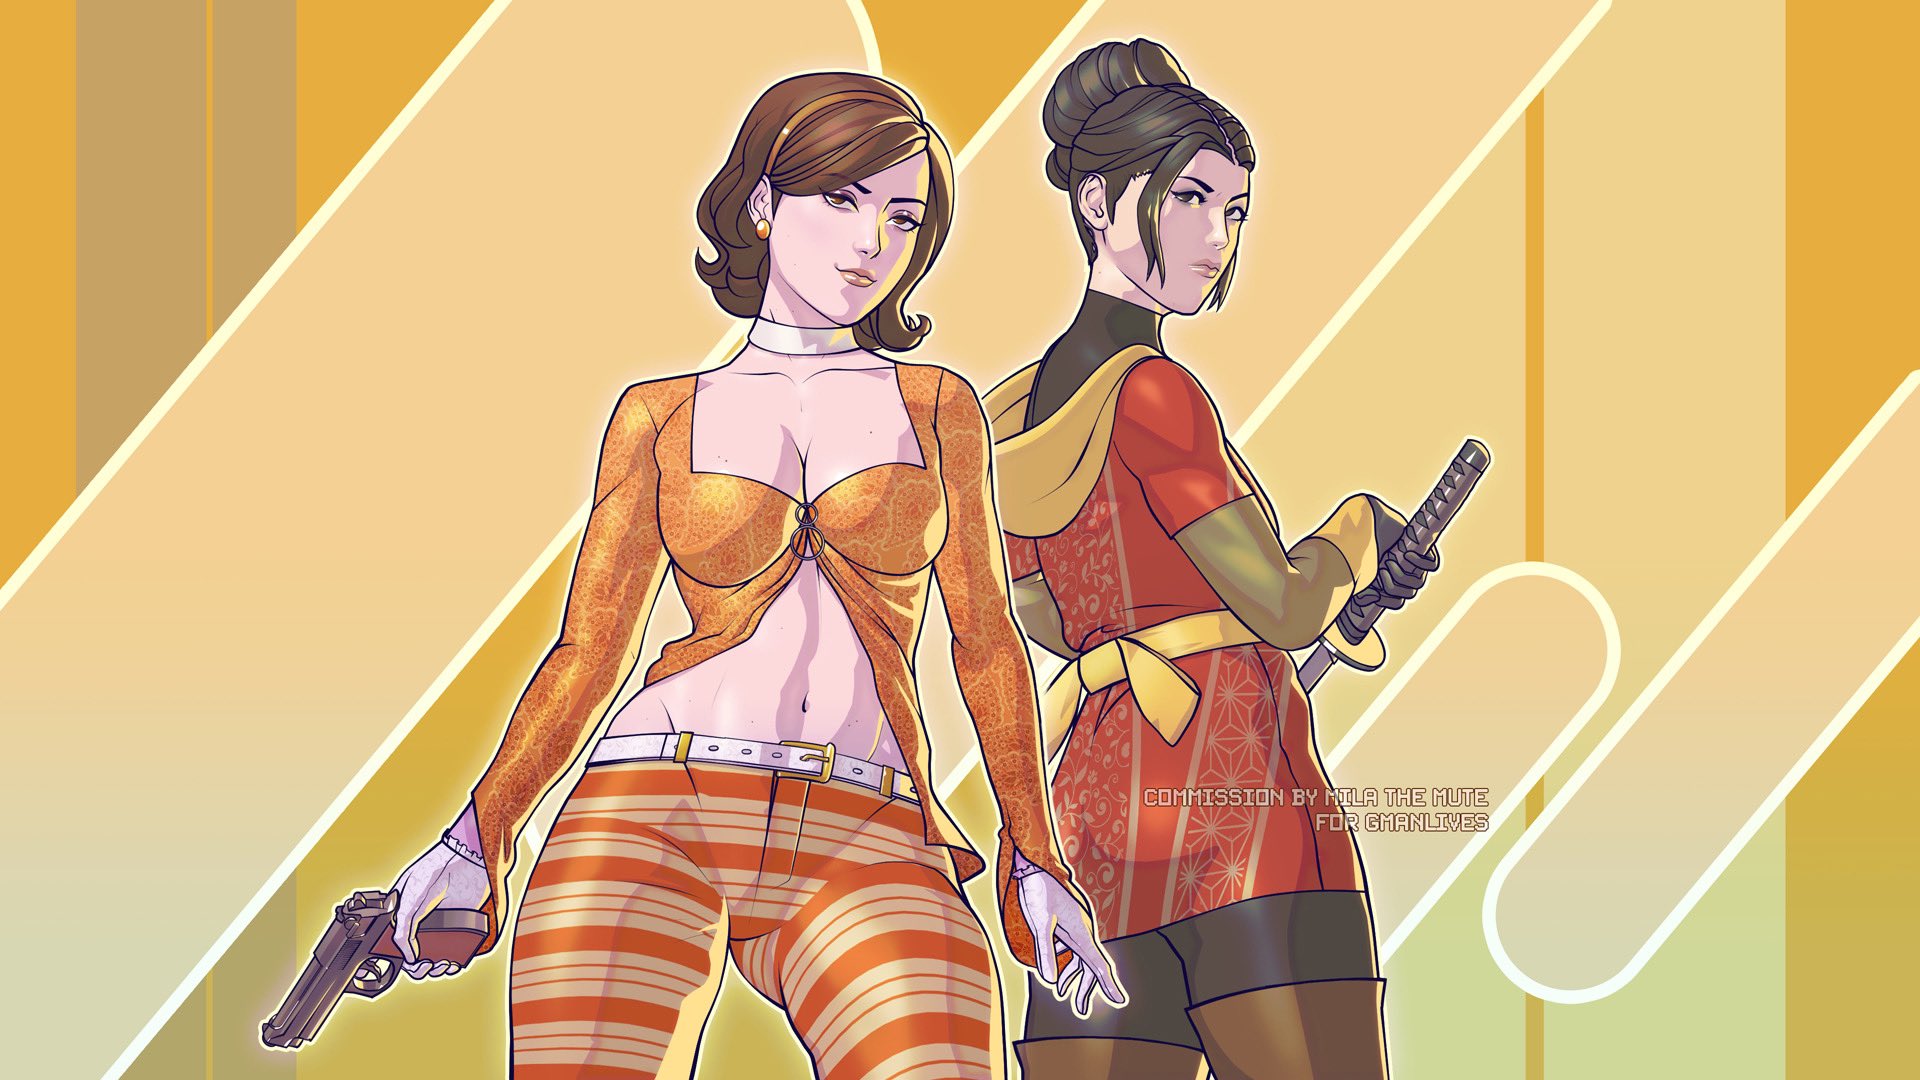 General 1920x1080 girls with guns women No One Lives Forever Kate Archer belly button bare midriff pistol katana Japan video game characters weapon gun cleavage minimalism simple background looking at viewer earring big boobs